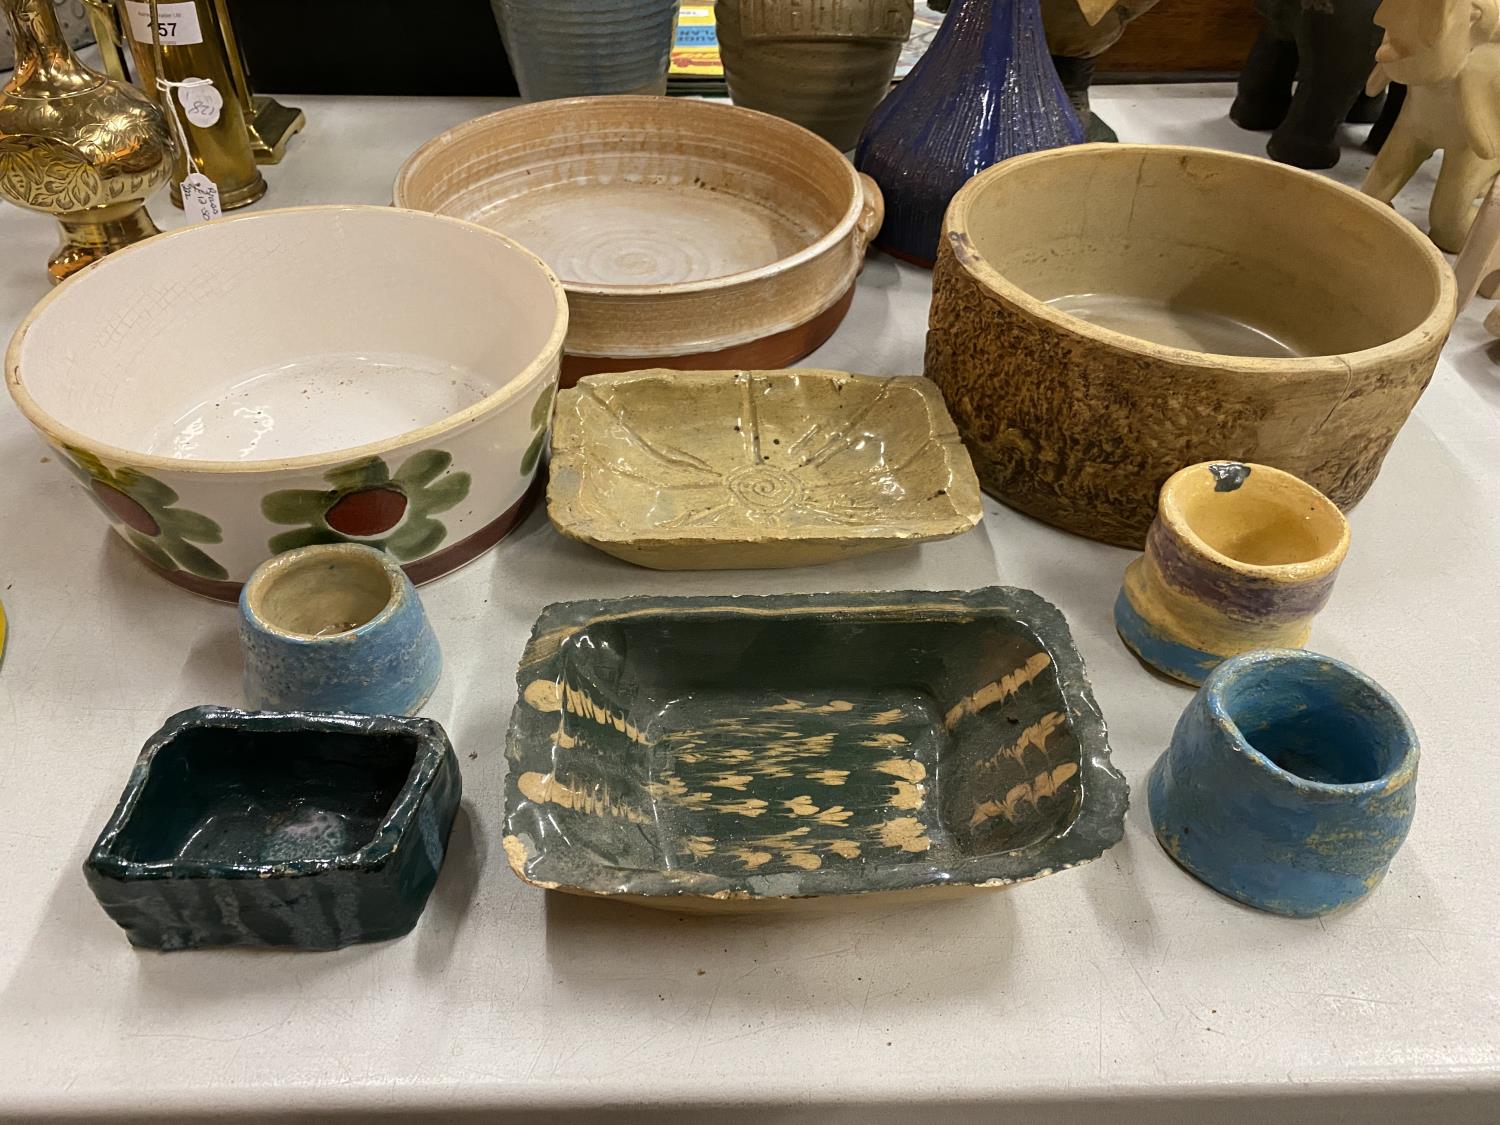 A MIXED COLLECTION OF POTTERY ITEMS INCLUDING VASES, BOWLS AND TRINKET DISHES ETC. - Image 2 of 7